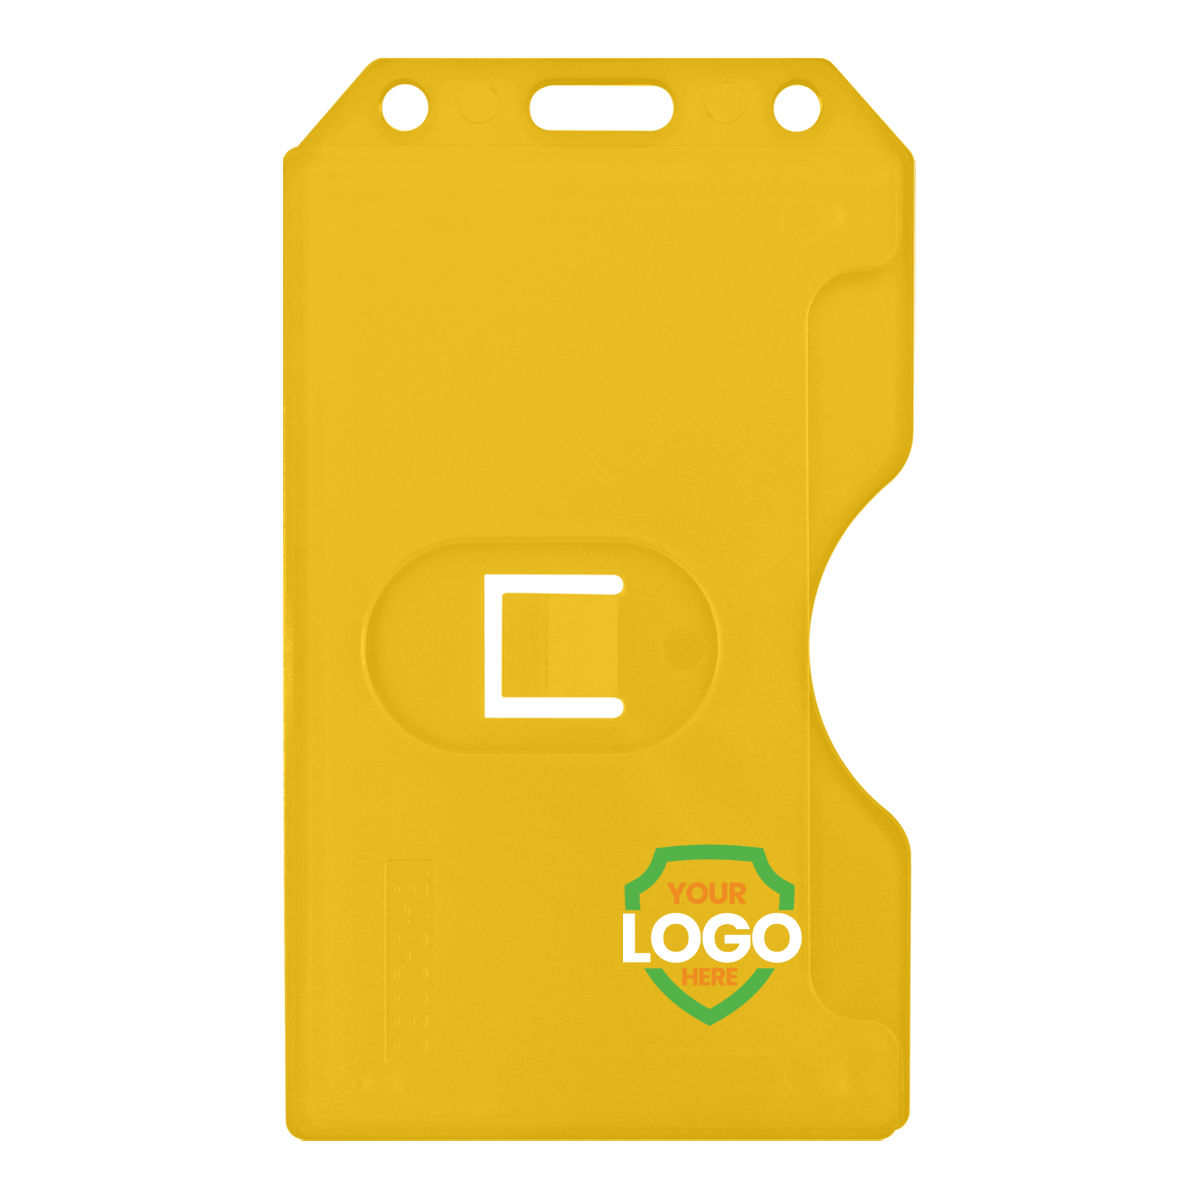 Vertical hard plastic yellow multi card badge holder with example logo showing customization option